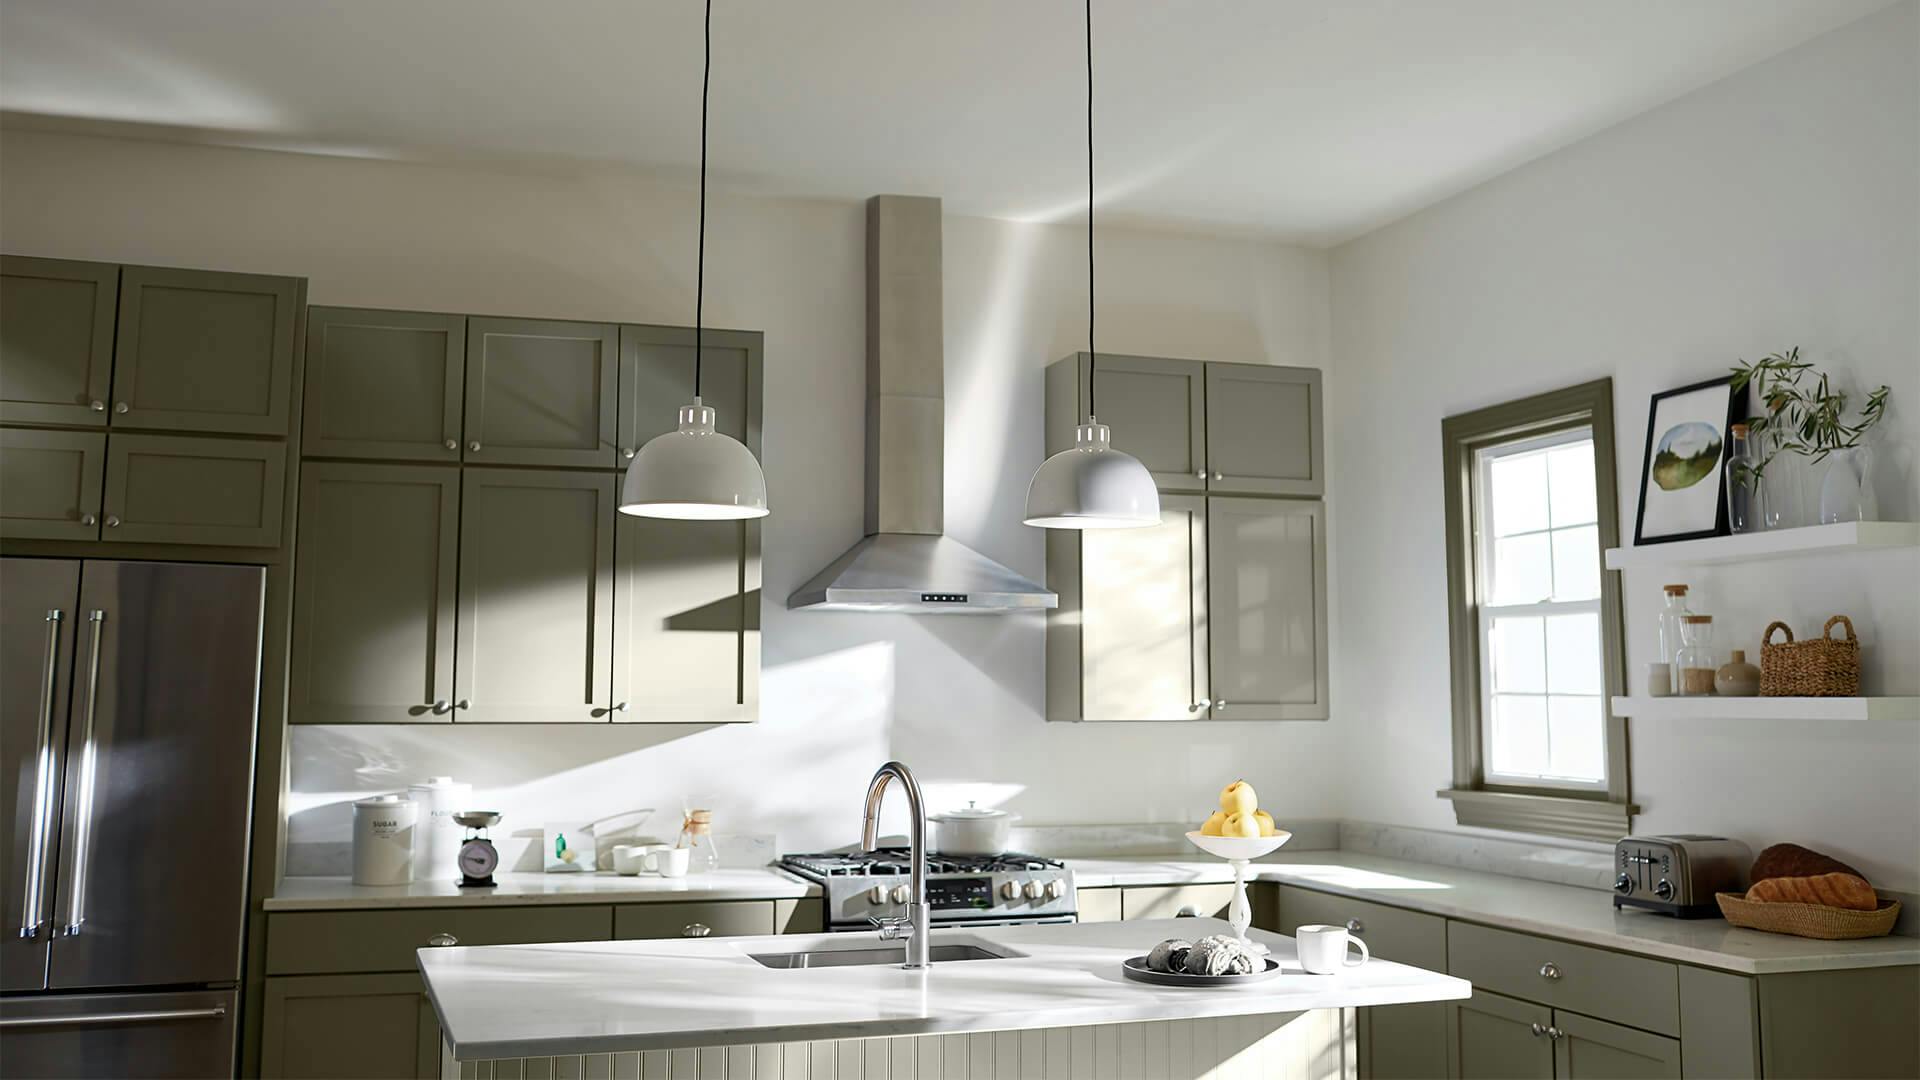 Two Zailey pendants above a kitchen island turned on in the daytime